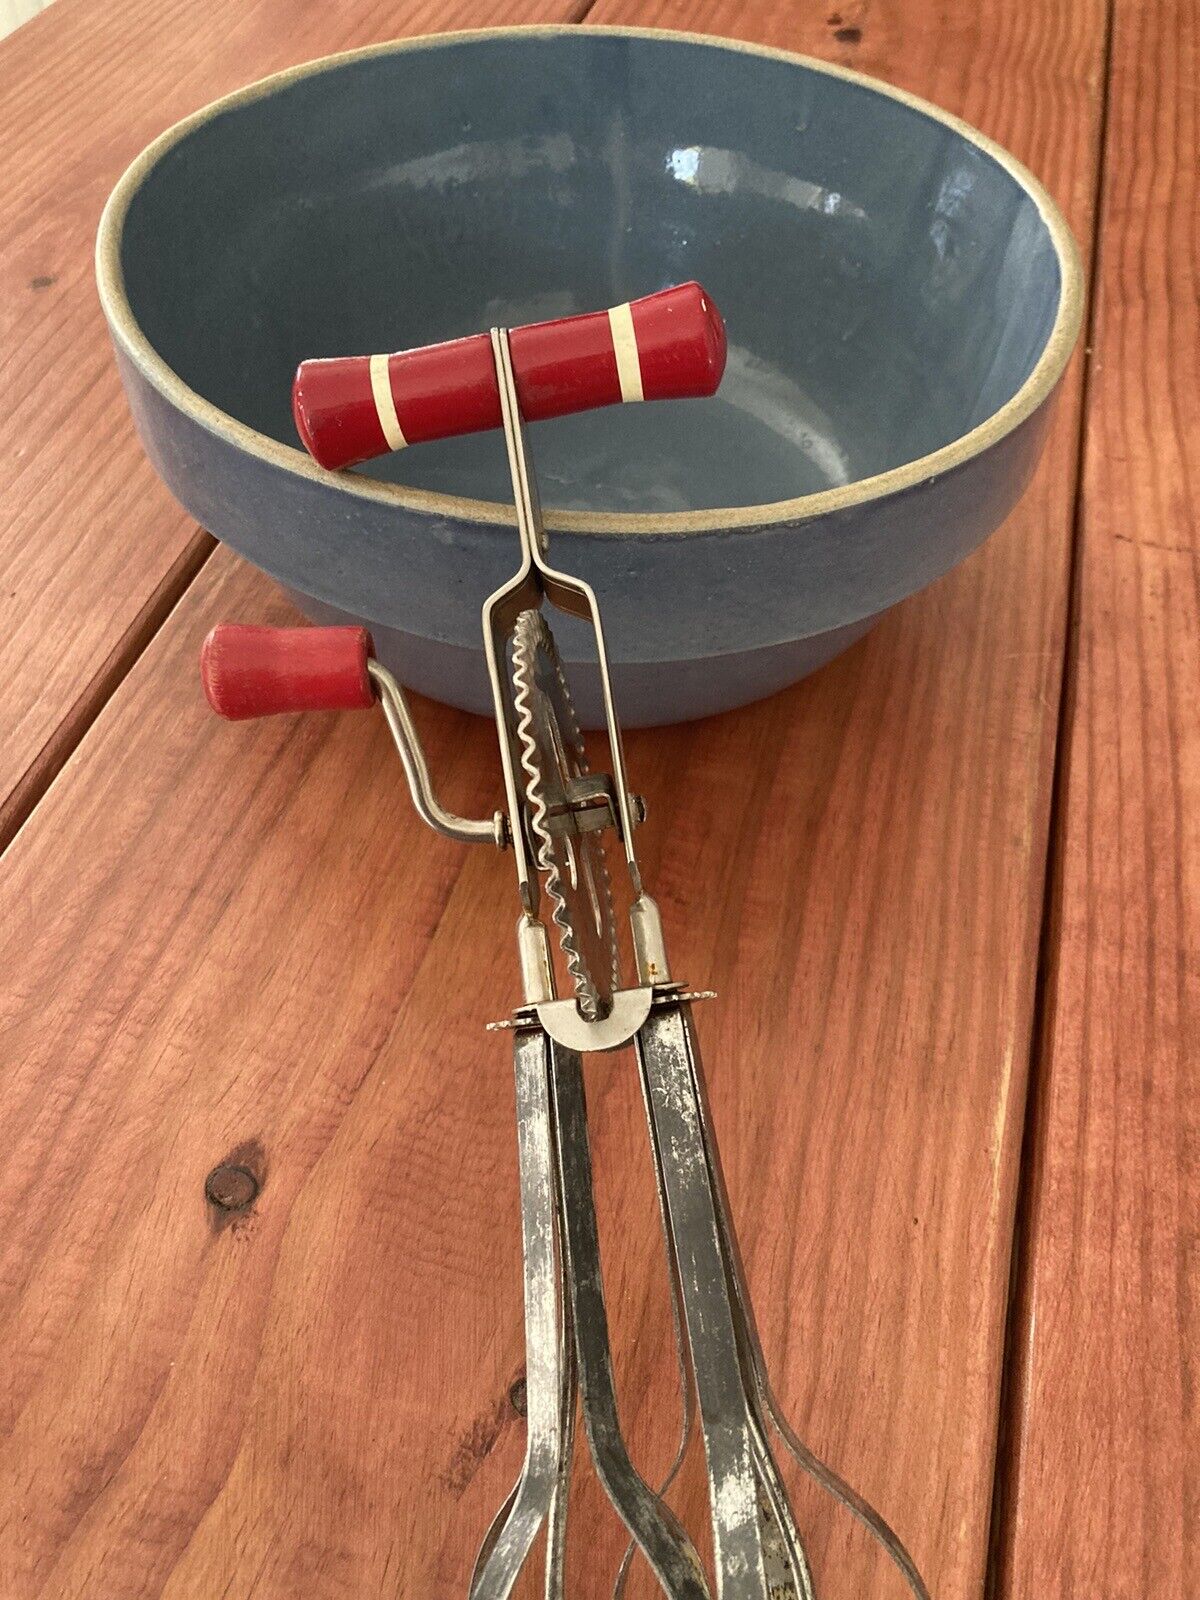 vintage egg beater red handle Remarkable Paint ‘high Speed Super’ Gear EKCO USA